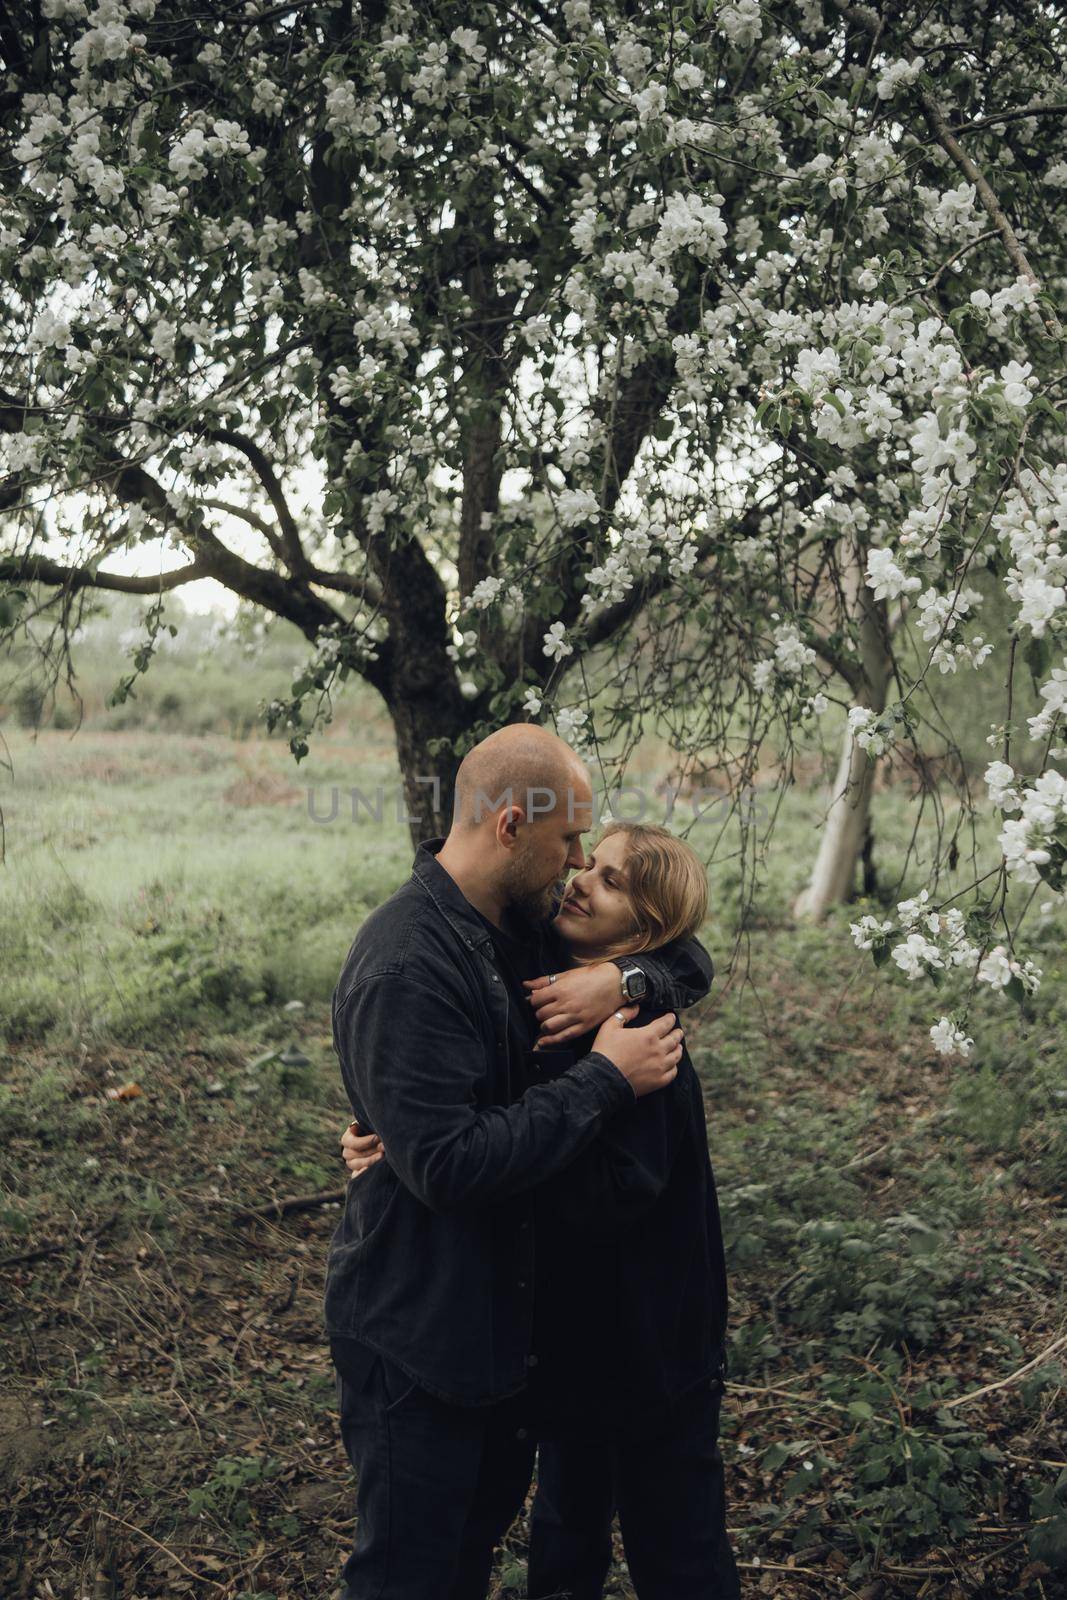 lovers embrace under a flowering tree hiding from the rain